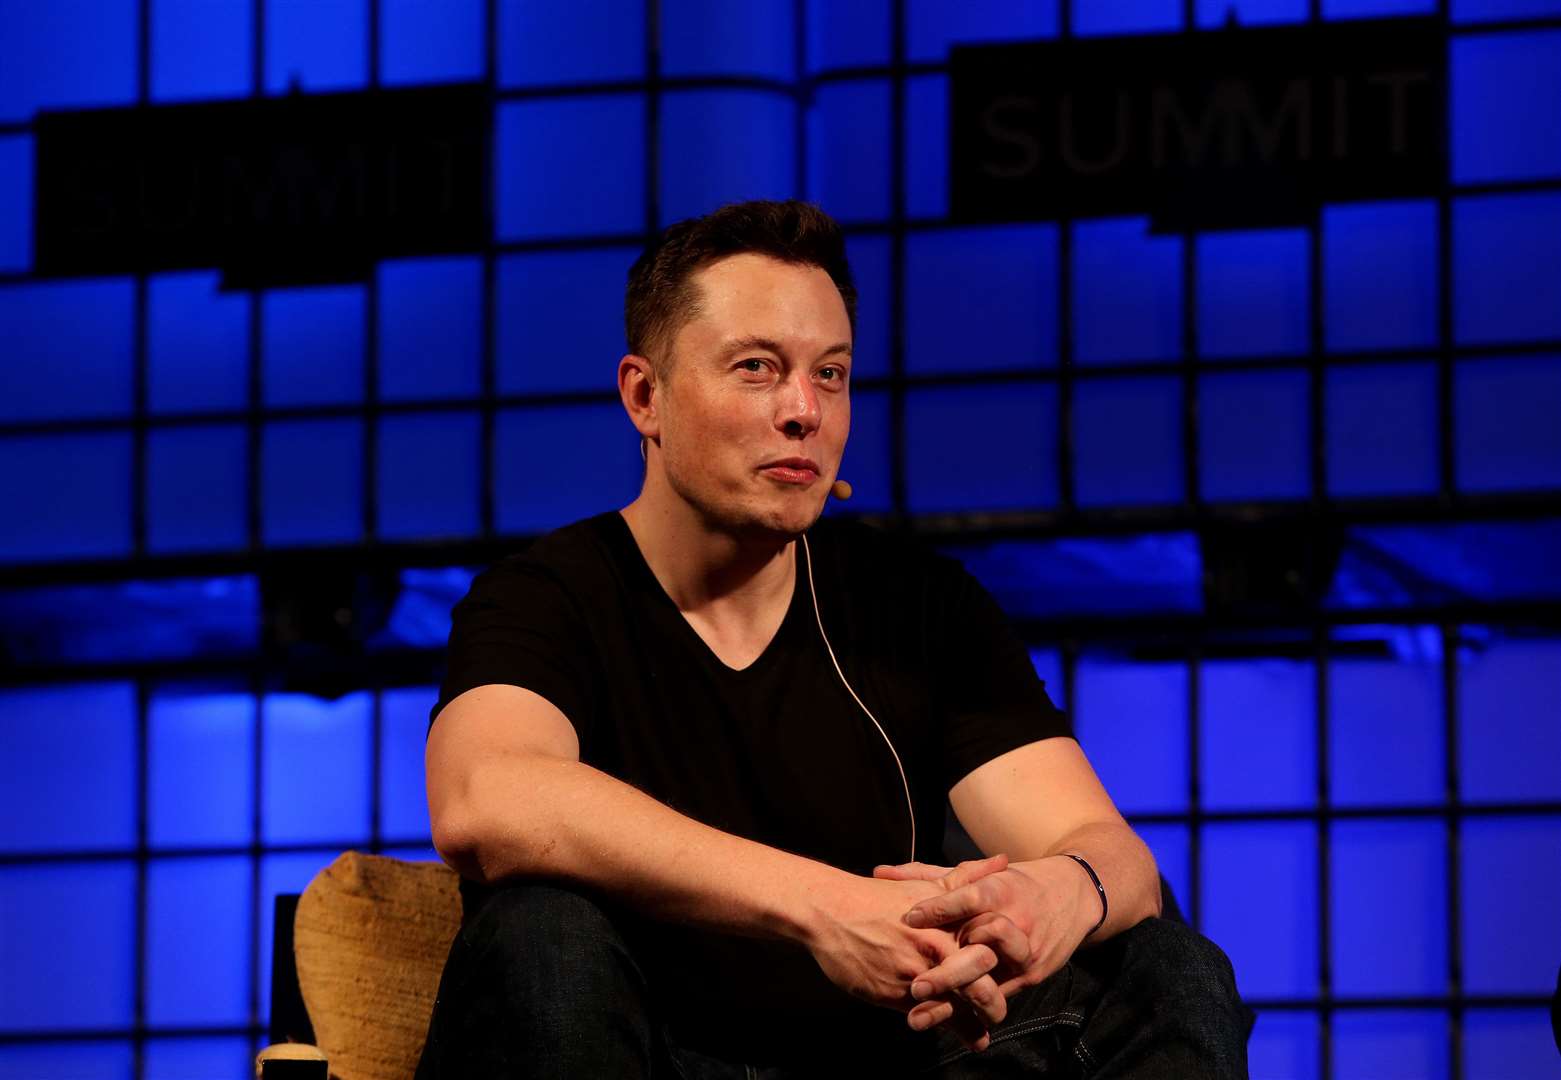 Elon Musk said he decided to contact Mr Thorleifsson directly via videocall ‘to figure out what’s real vs what I was told’ (Brian Lawless/PA)